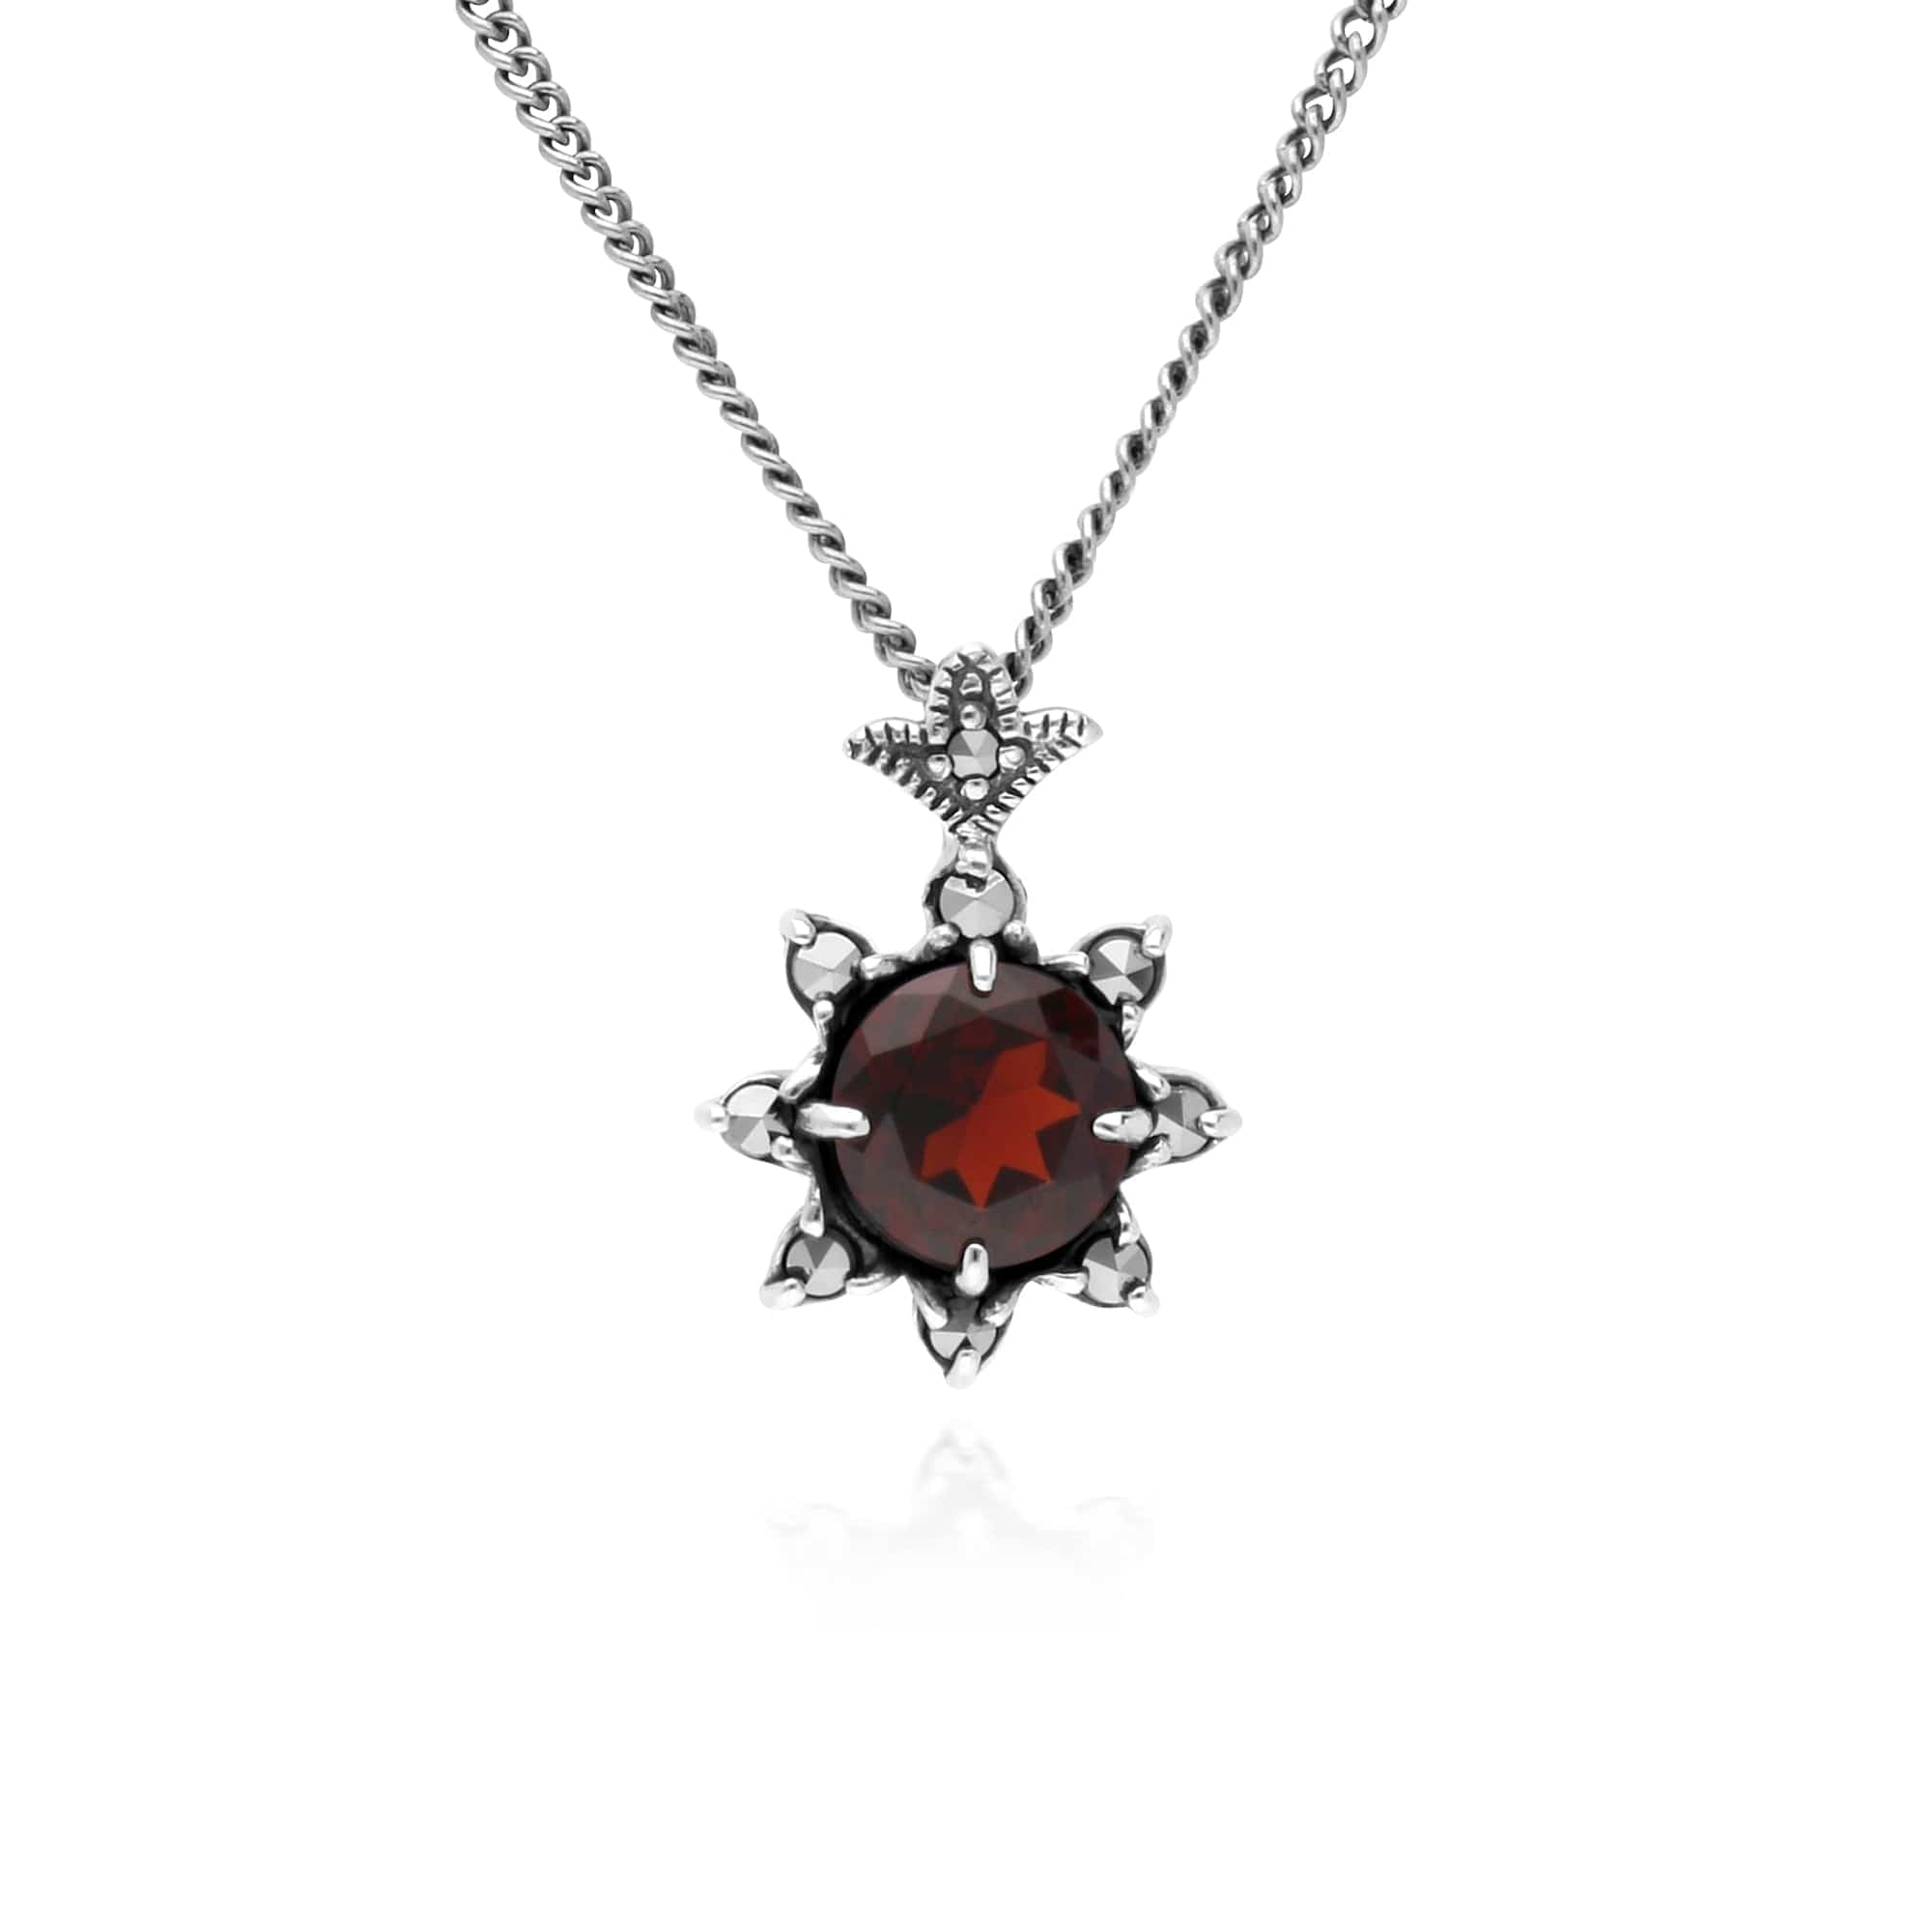 214N696003925-214R599503925 Art Nouveau Style Style Round Garnet & Marcasite Starburst Pendant & Ring Set in 925 Sterling Silver 2